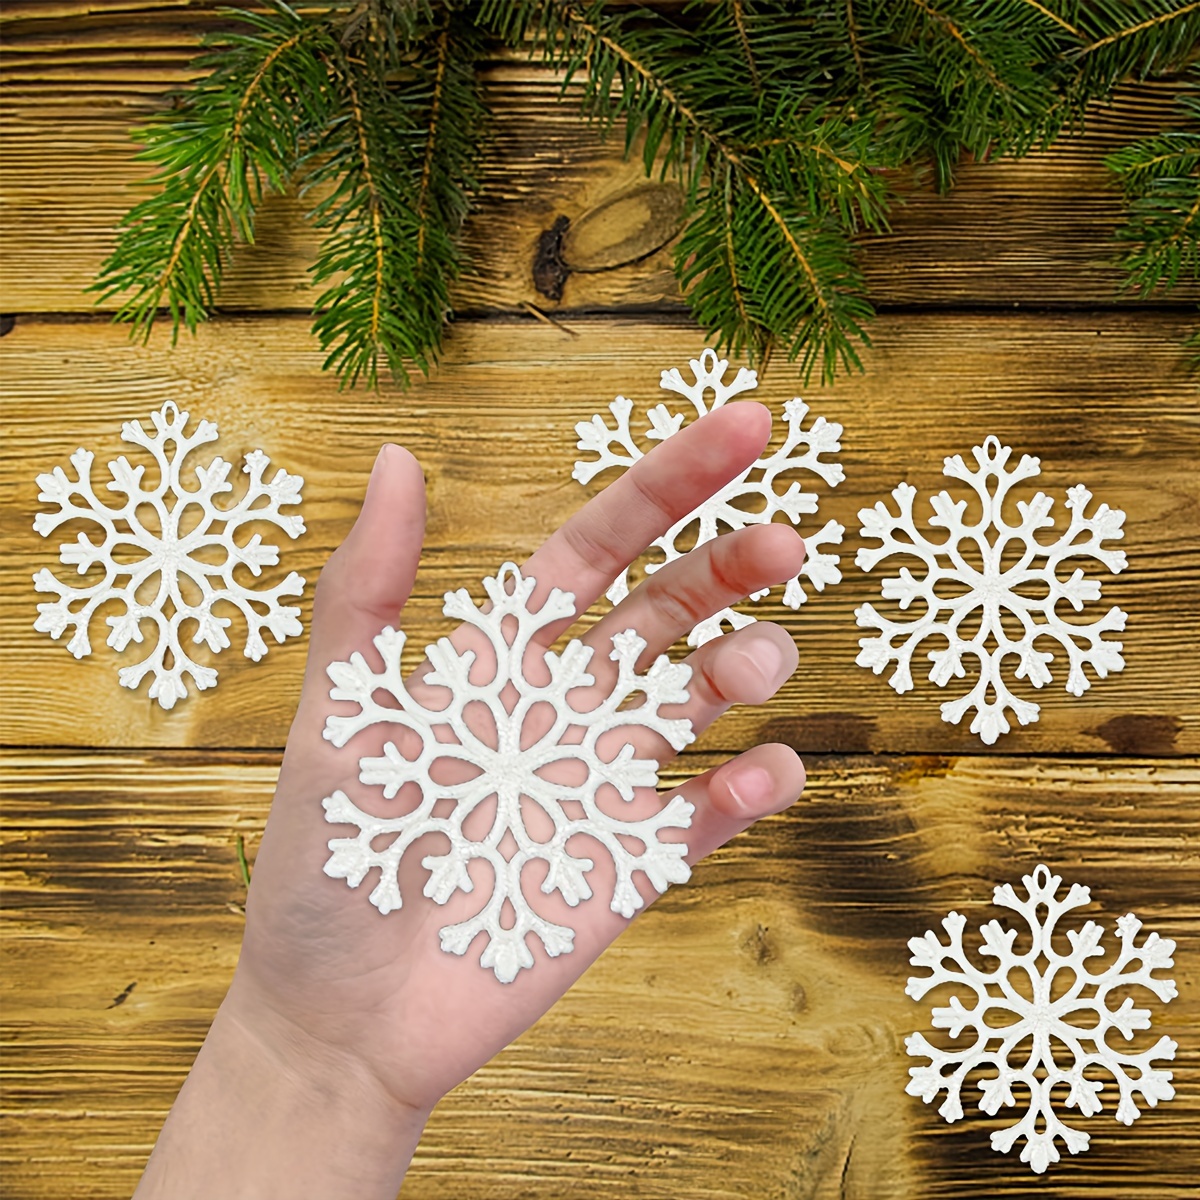 36 Pcs Glitter Christmas Snowflake Ornaments, 4 Inch Plastic Snow Flakes  Hanging Xmas Tree Snowflake Decorations for Winter Christmas Decors 